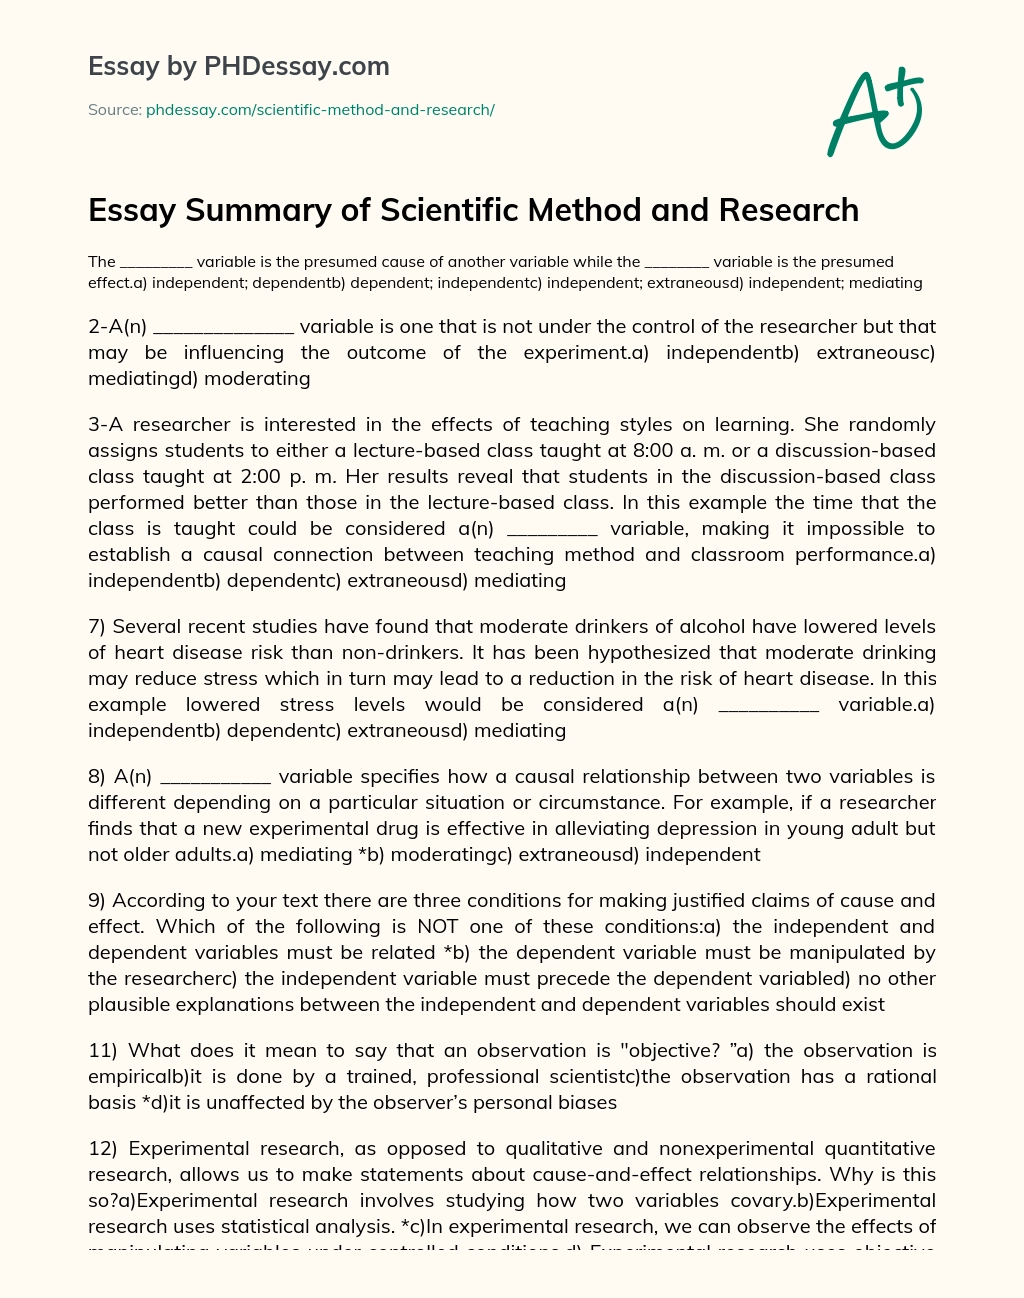 Essay Summary of Scientific Method and Research essay